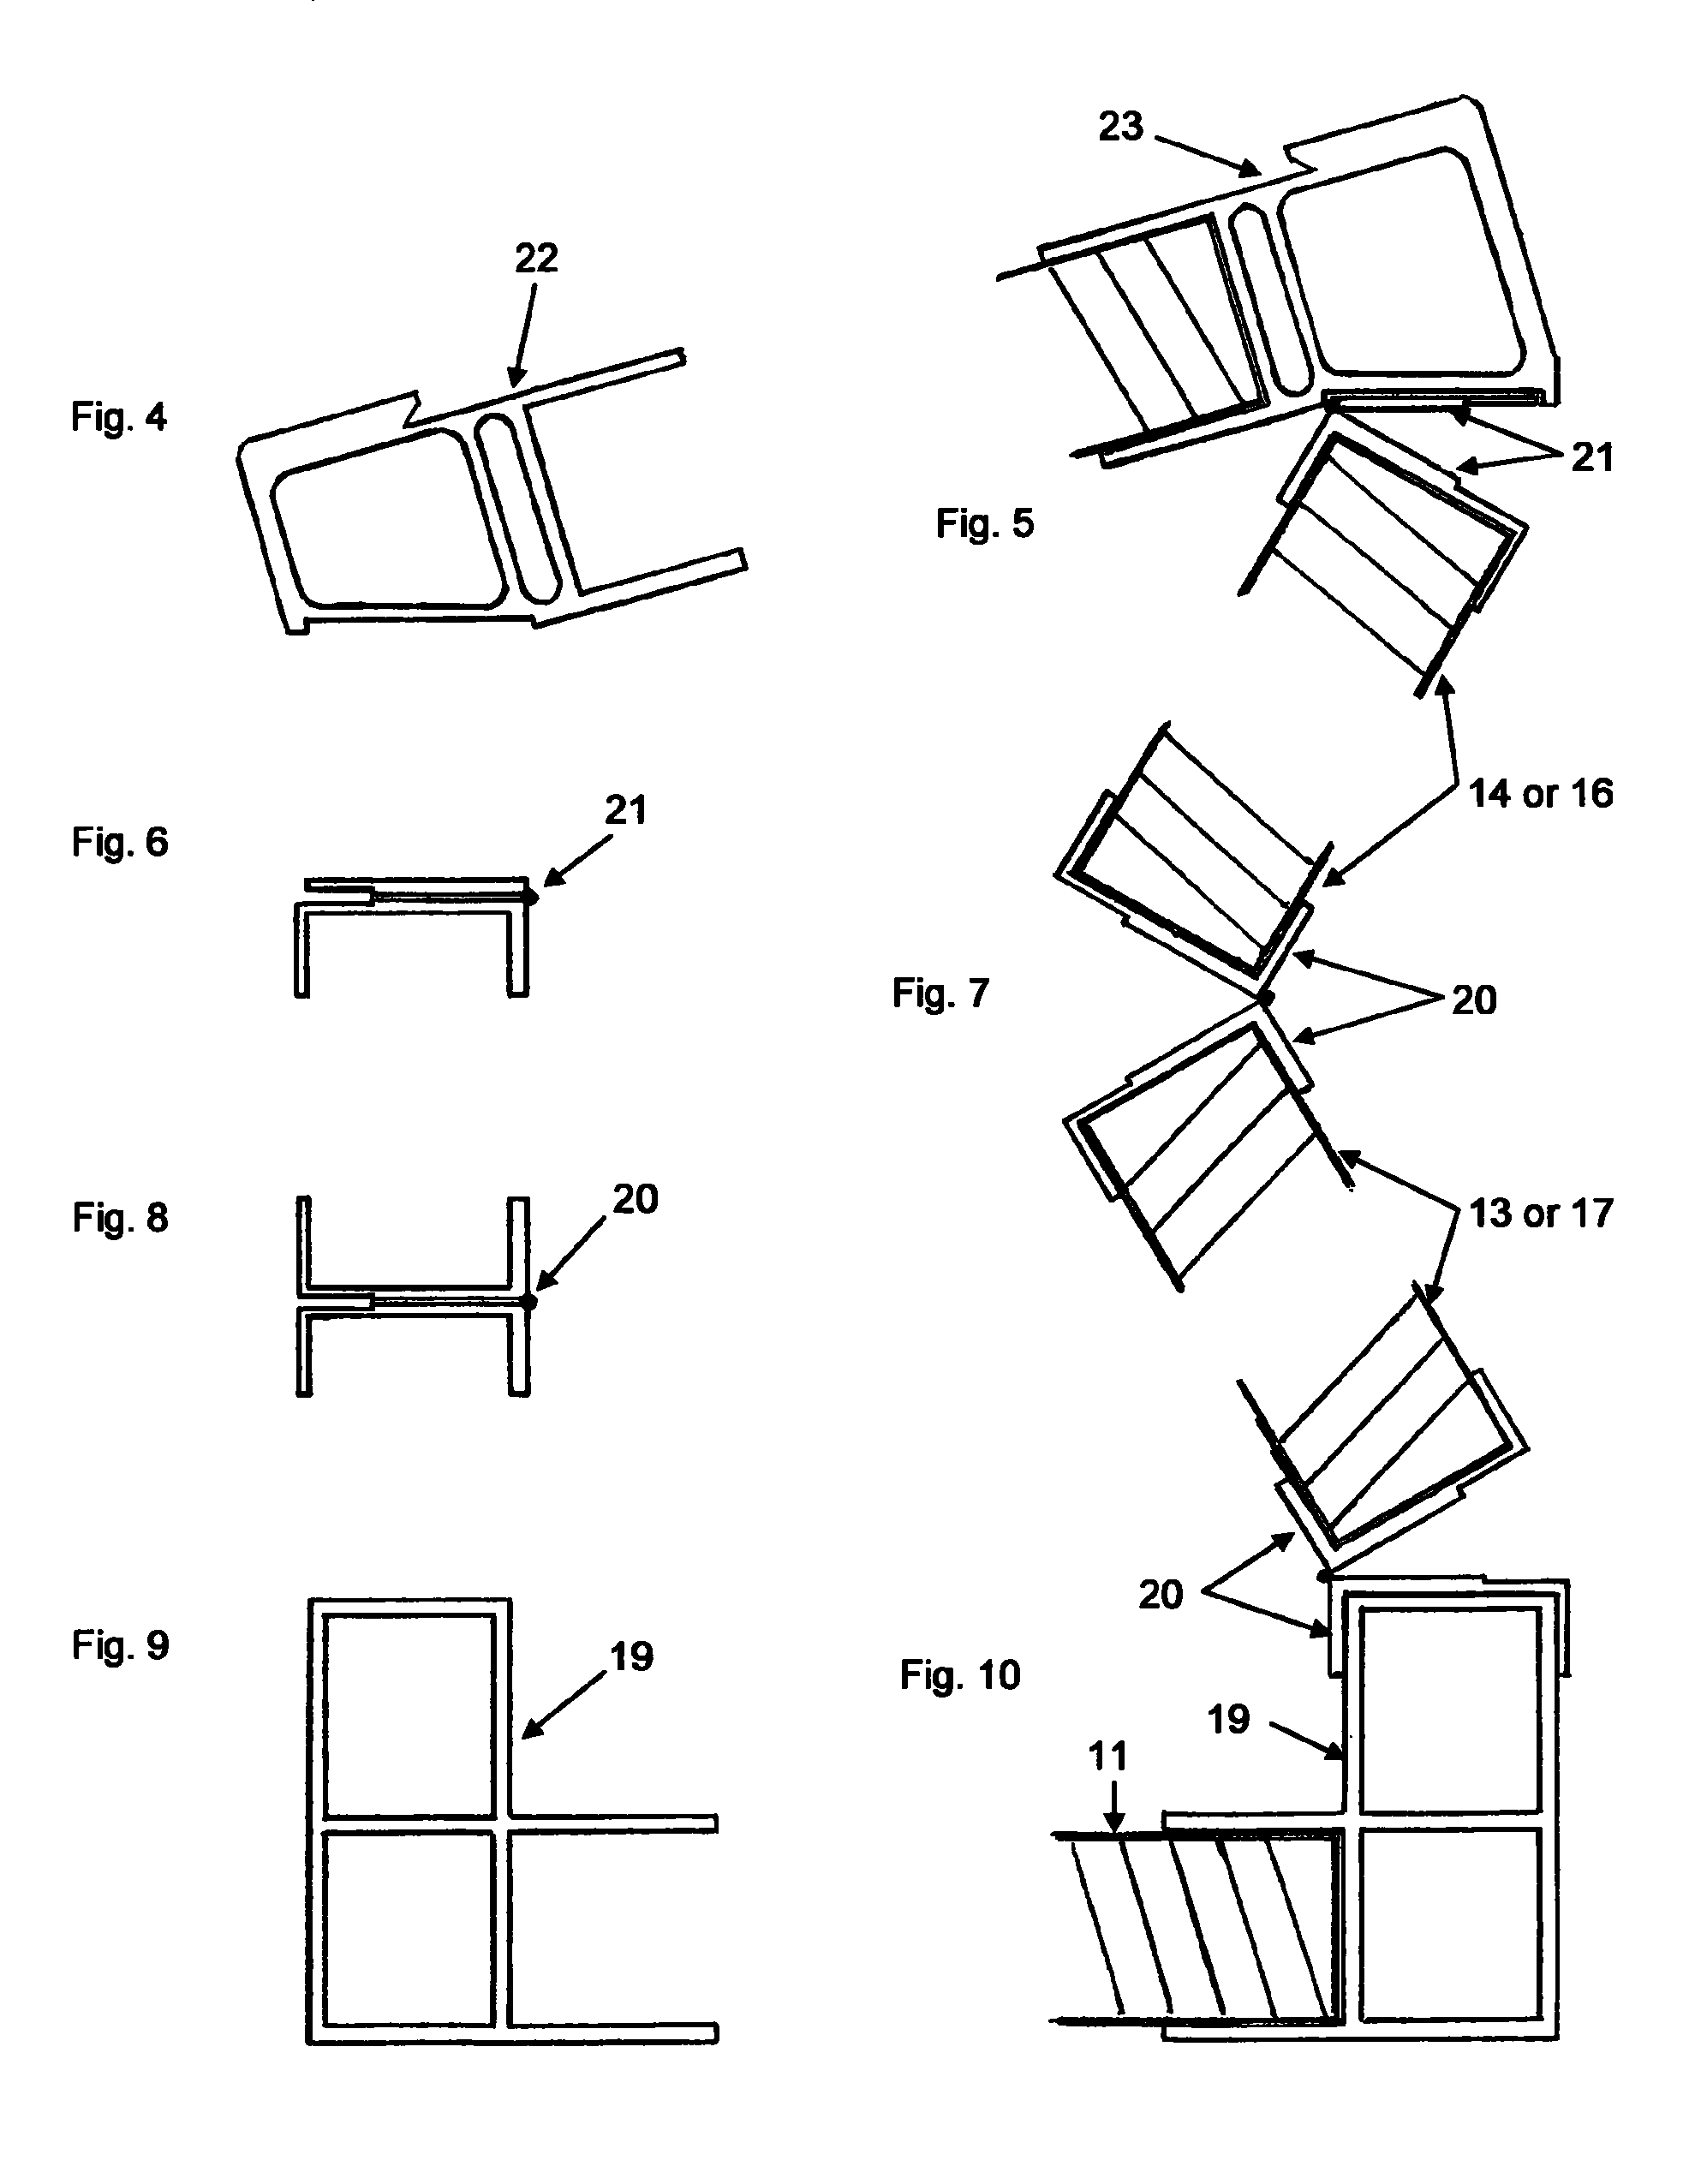 Foldable transportable structure